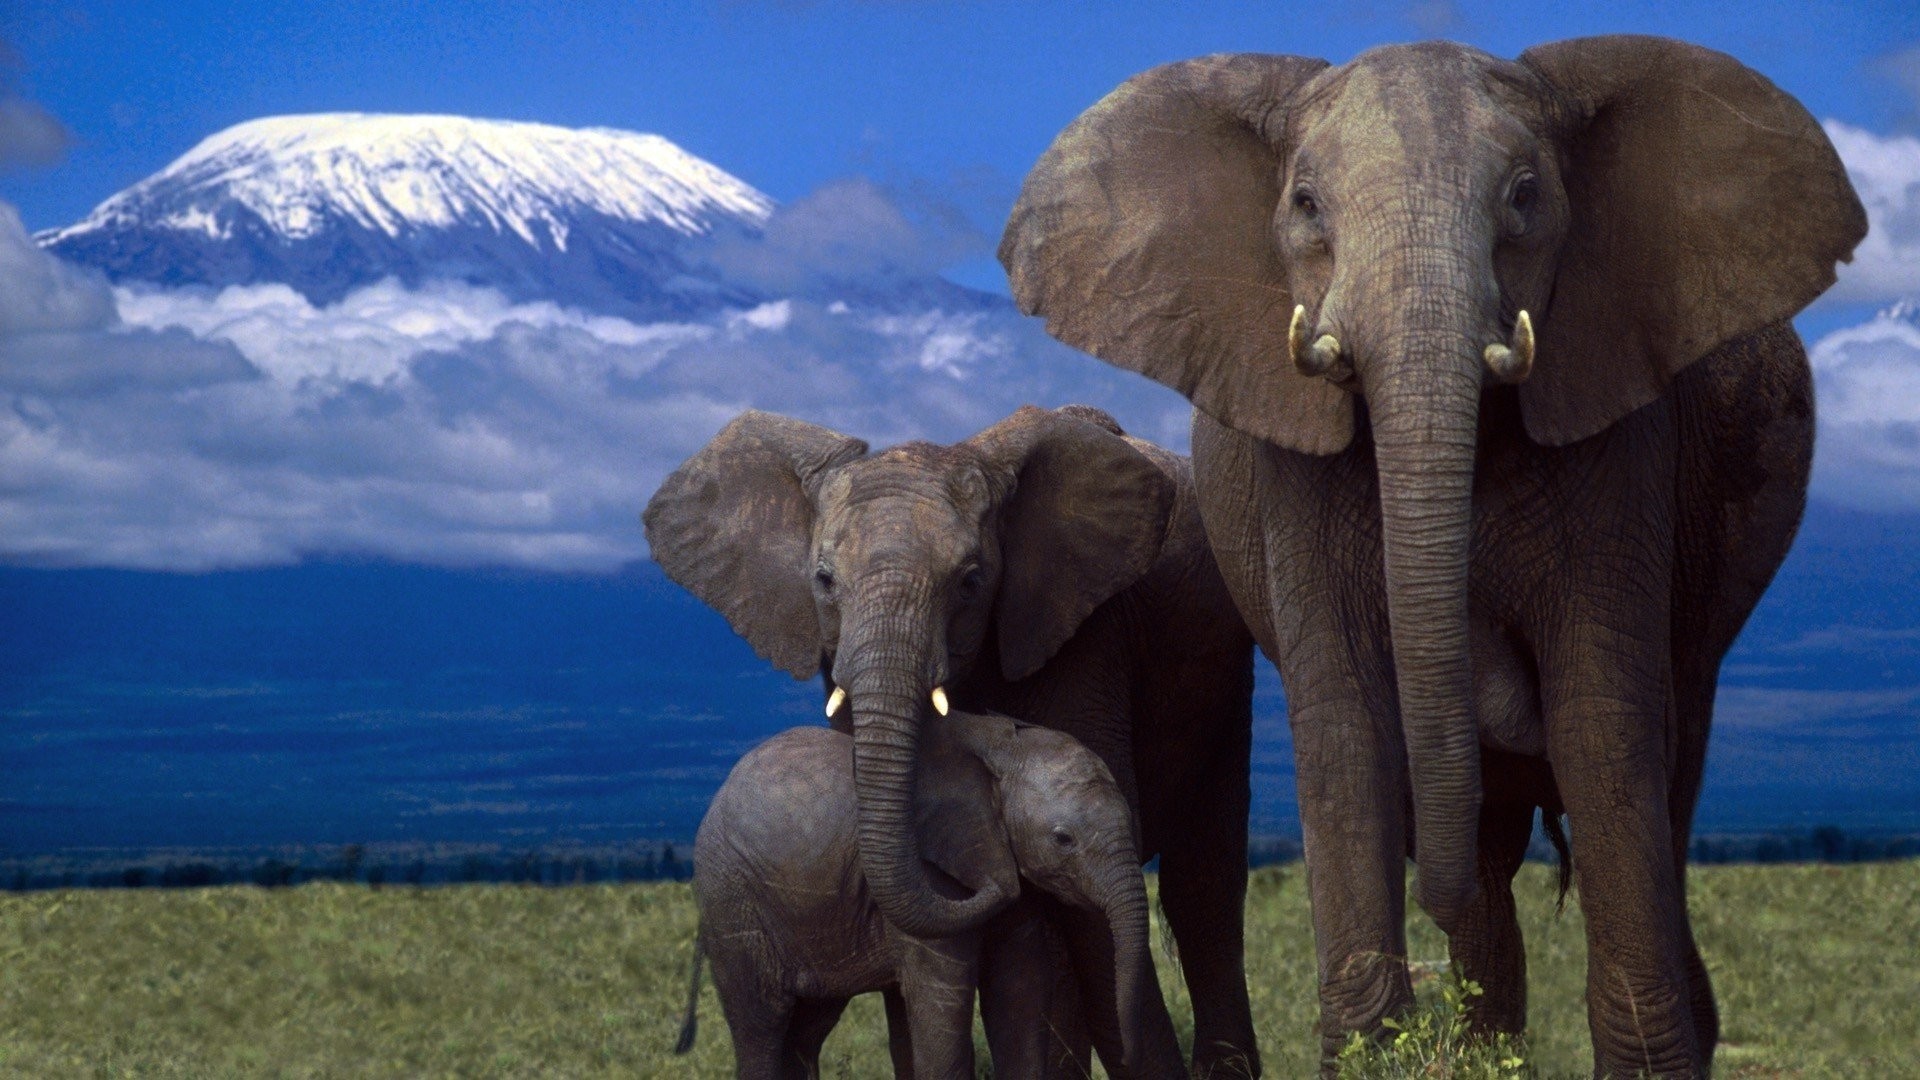 1920x1080 Elephant Tag - Family Elephant Amazing Animal Jungle Beauty African Cute  Animals Photos Collection for HD